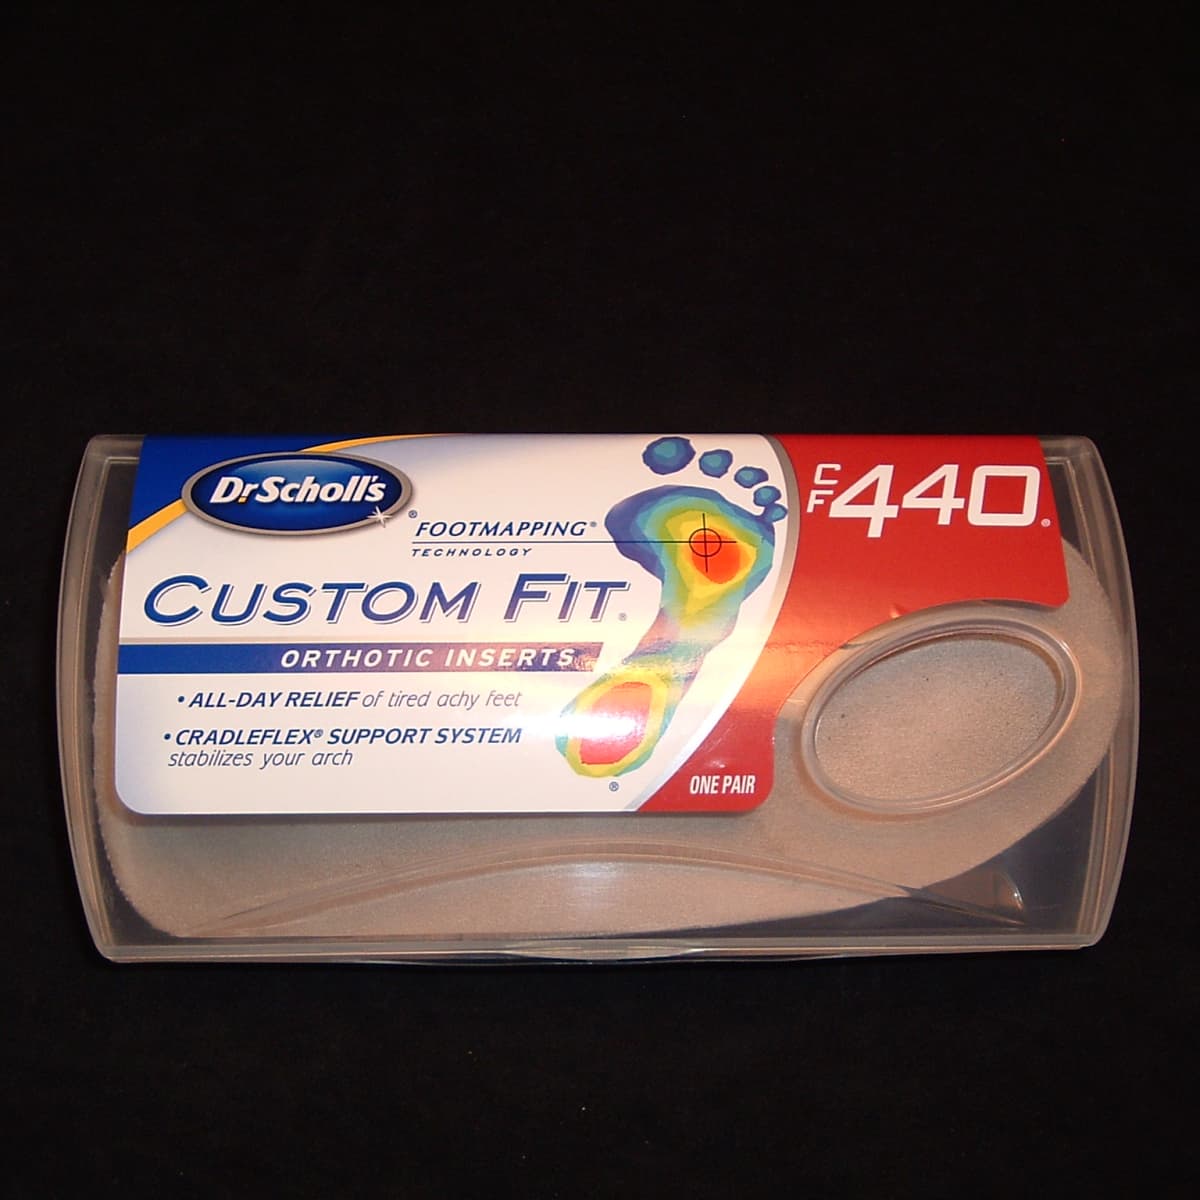 Dr. Scholl's Custom Fit Orthotic Inserts, CF 110 